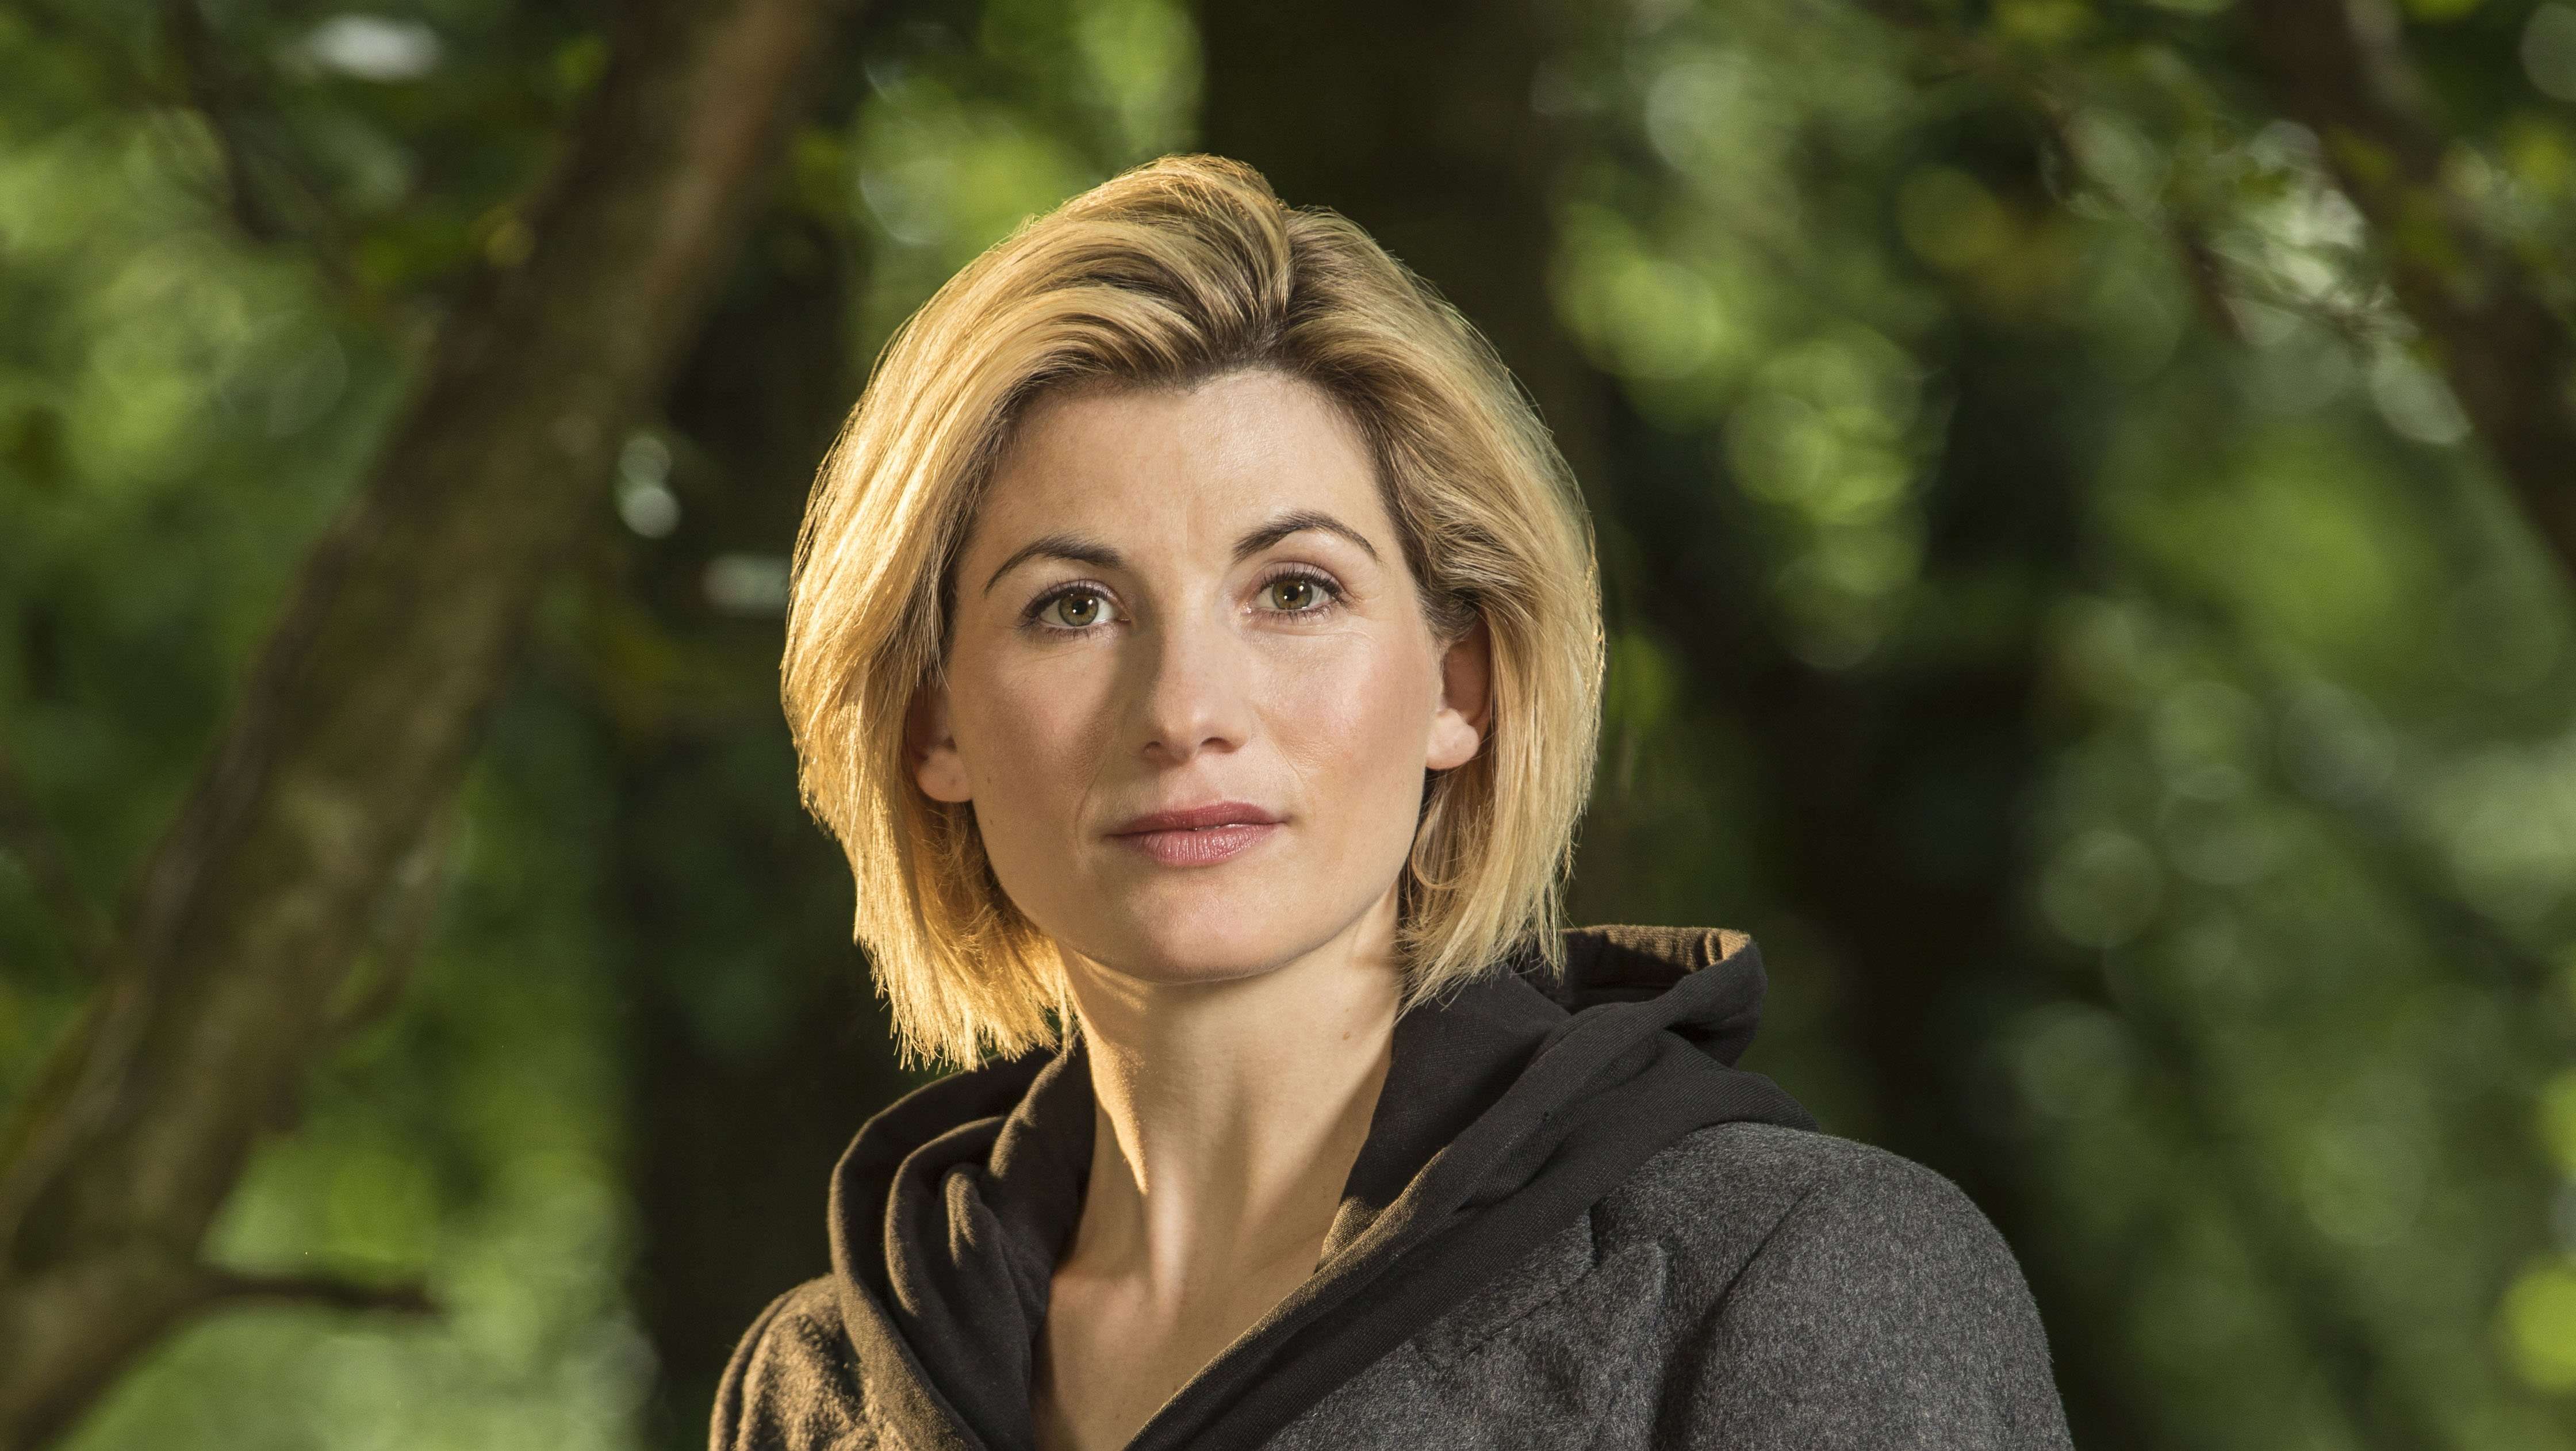 image for Amid Pay Gap Criticism, BBC Says New 'Doctor Who' Actress Will Be Paid Same as Current Star